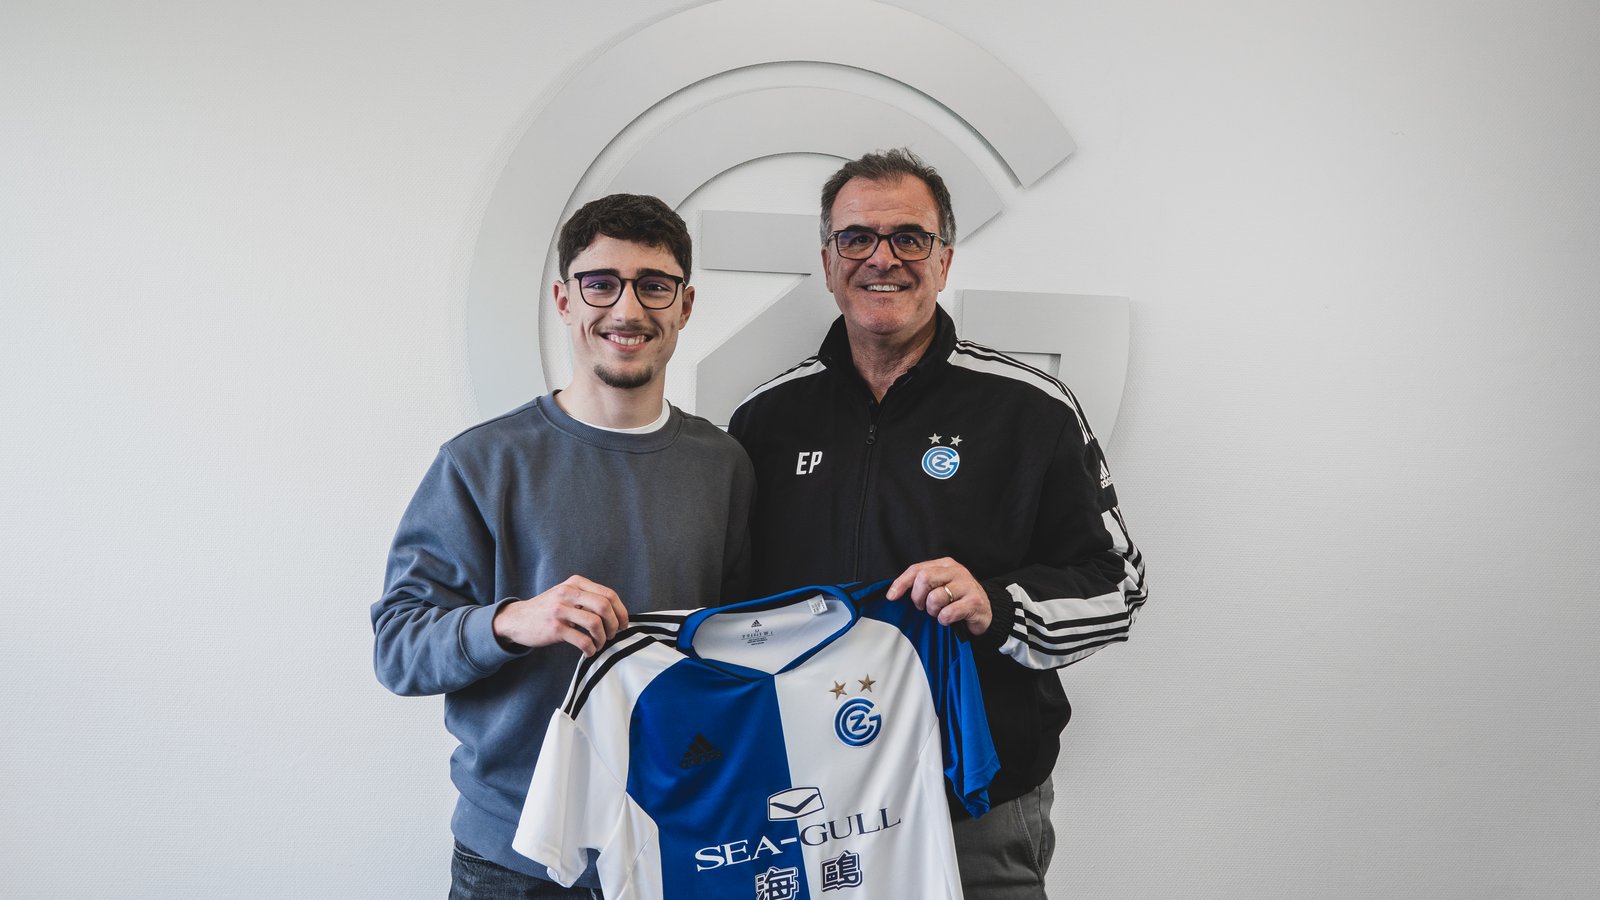 MARQUES SIGNS FIRST PROFESSIONAL CONTRACT